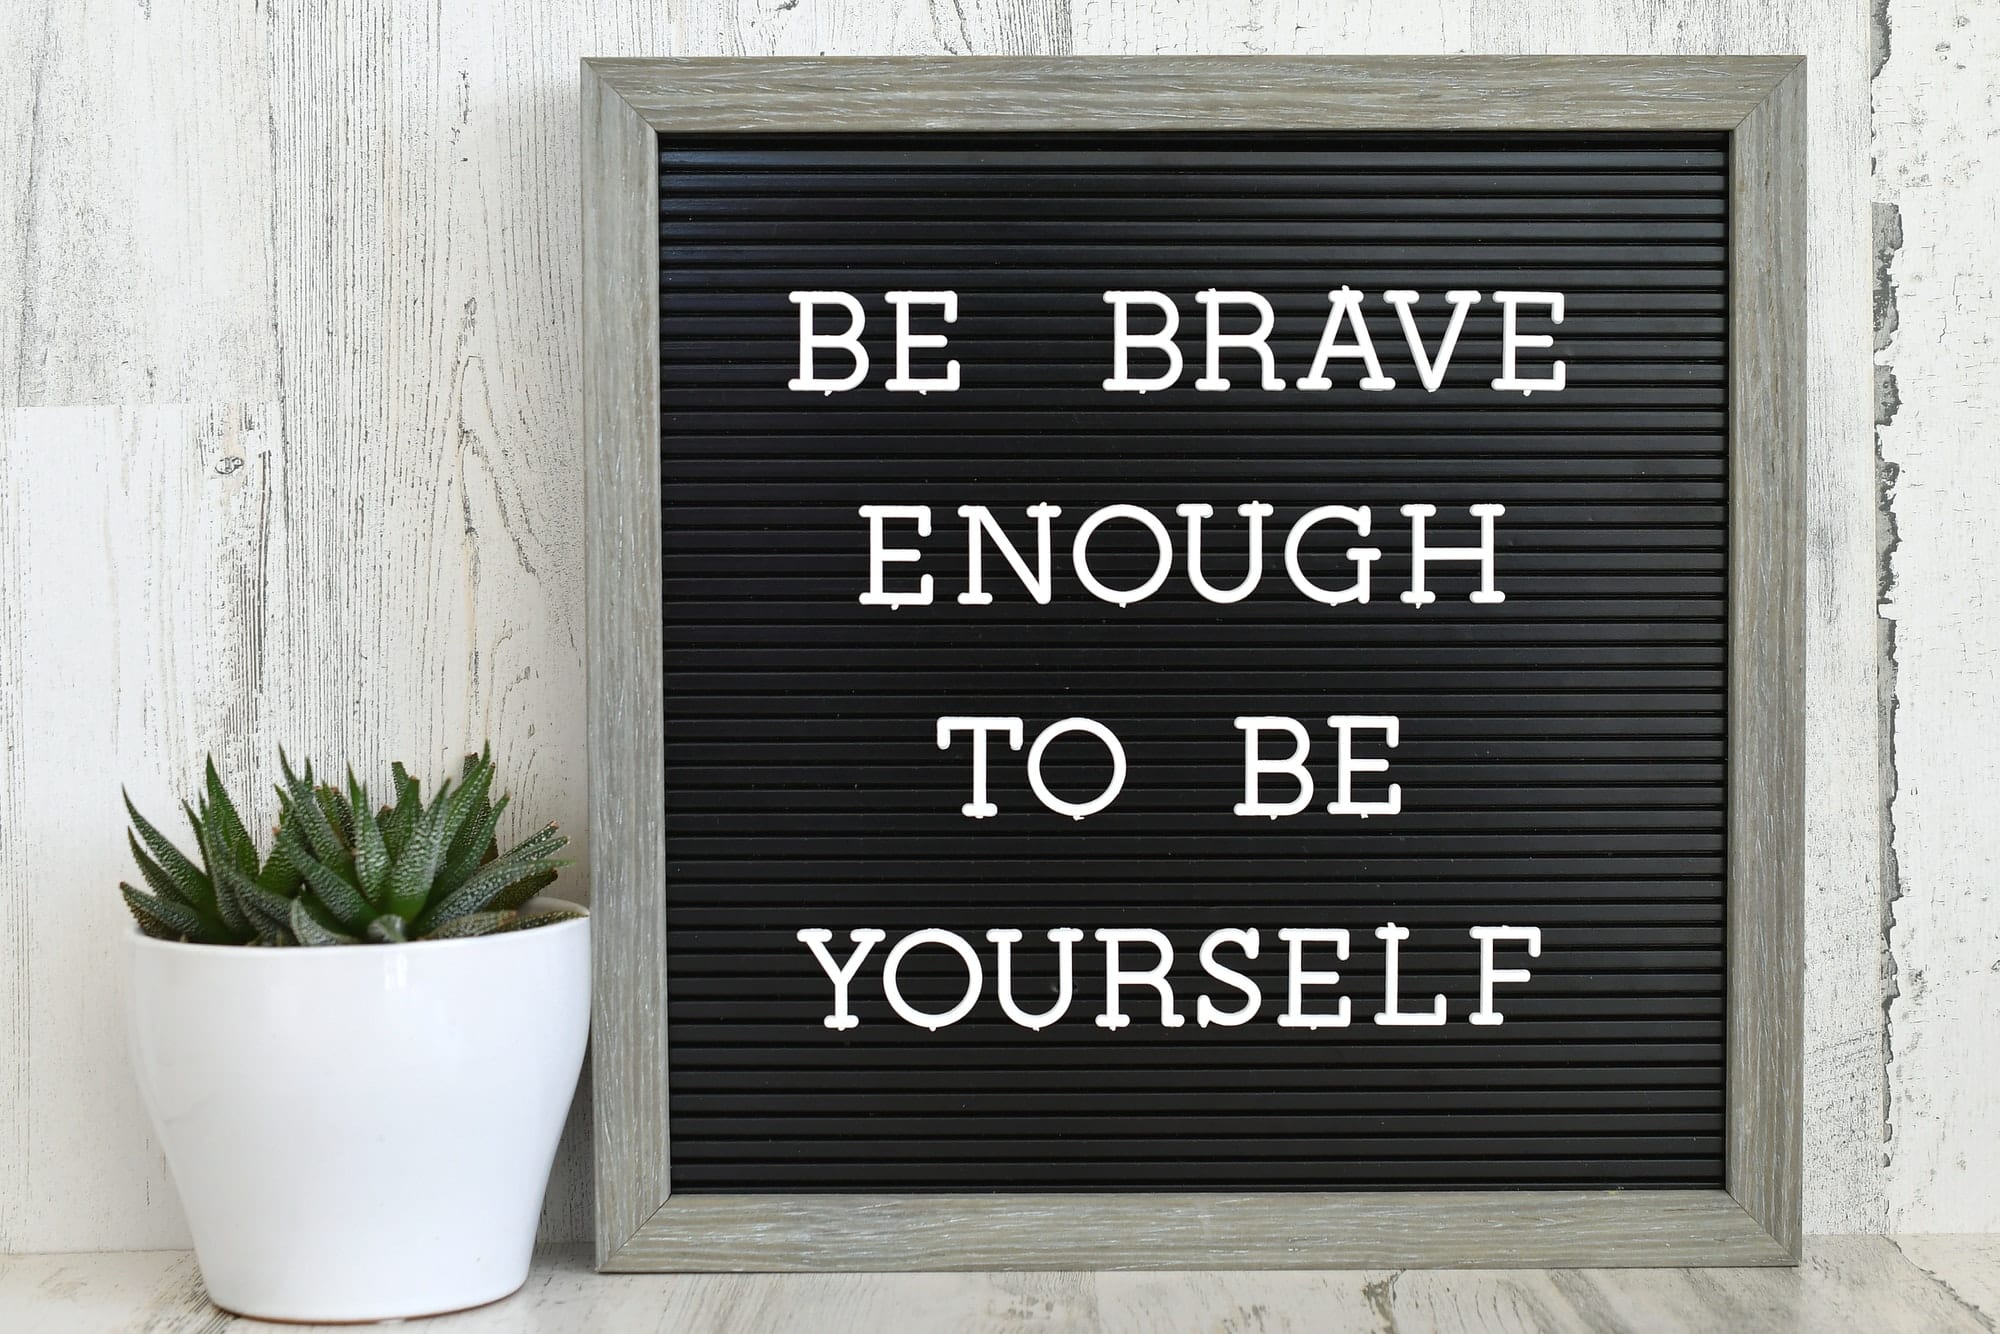 Be Brave Enough To Be Yourself - Inspirational quote, personal mantra, self acceptance, accept you